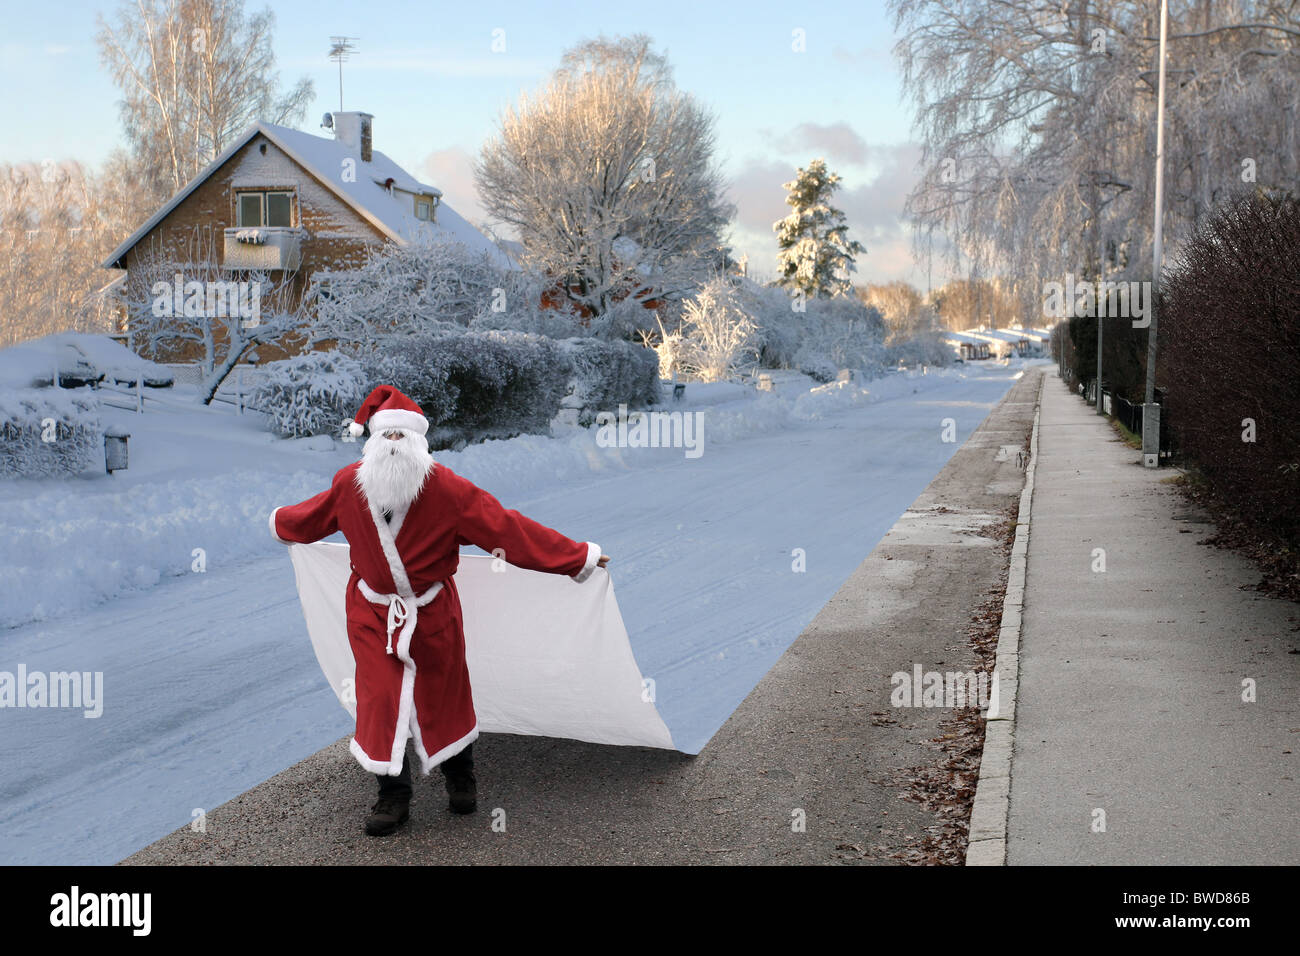 Santa Claus changing the season to winter by laying a sheet of snow on the ground. Stock Photo